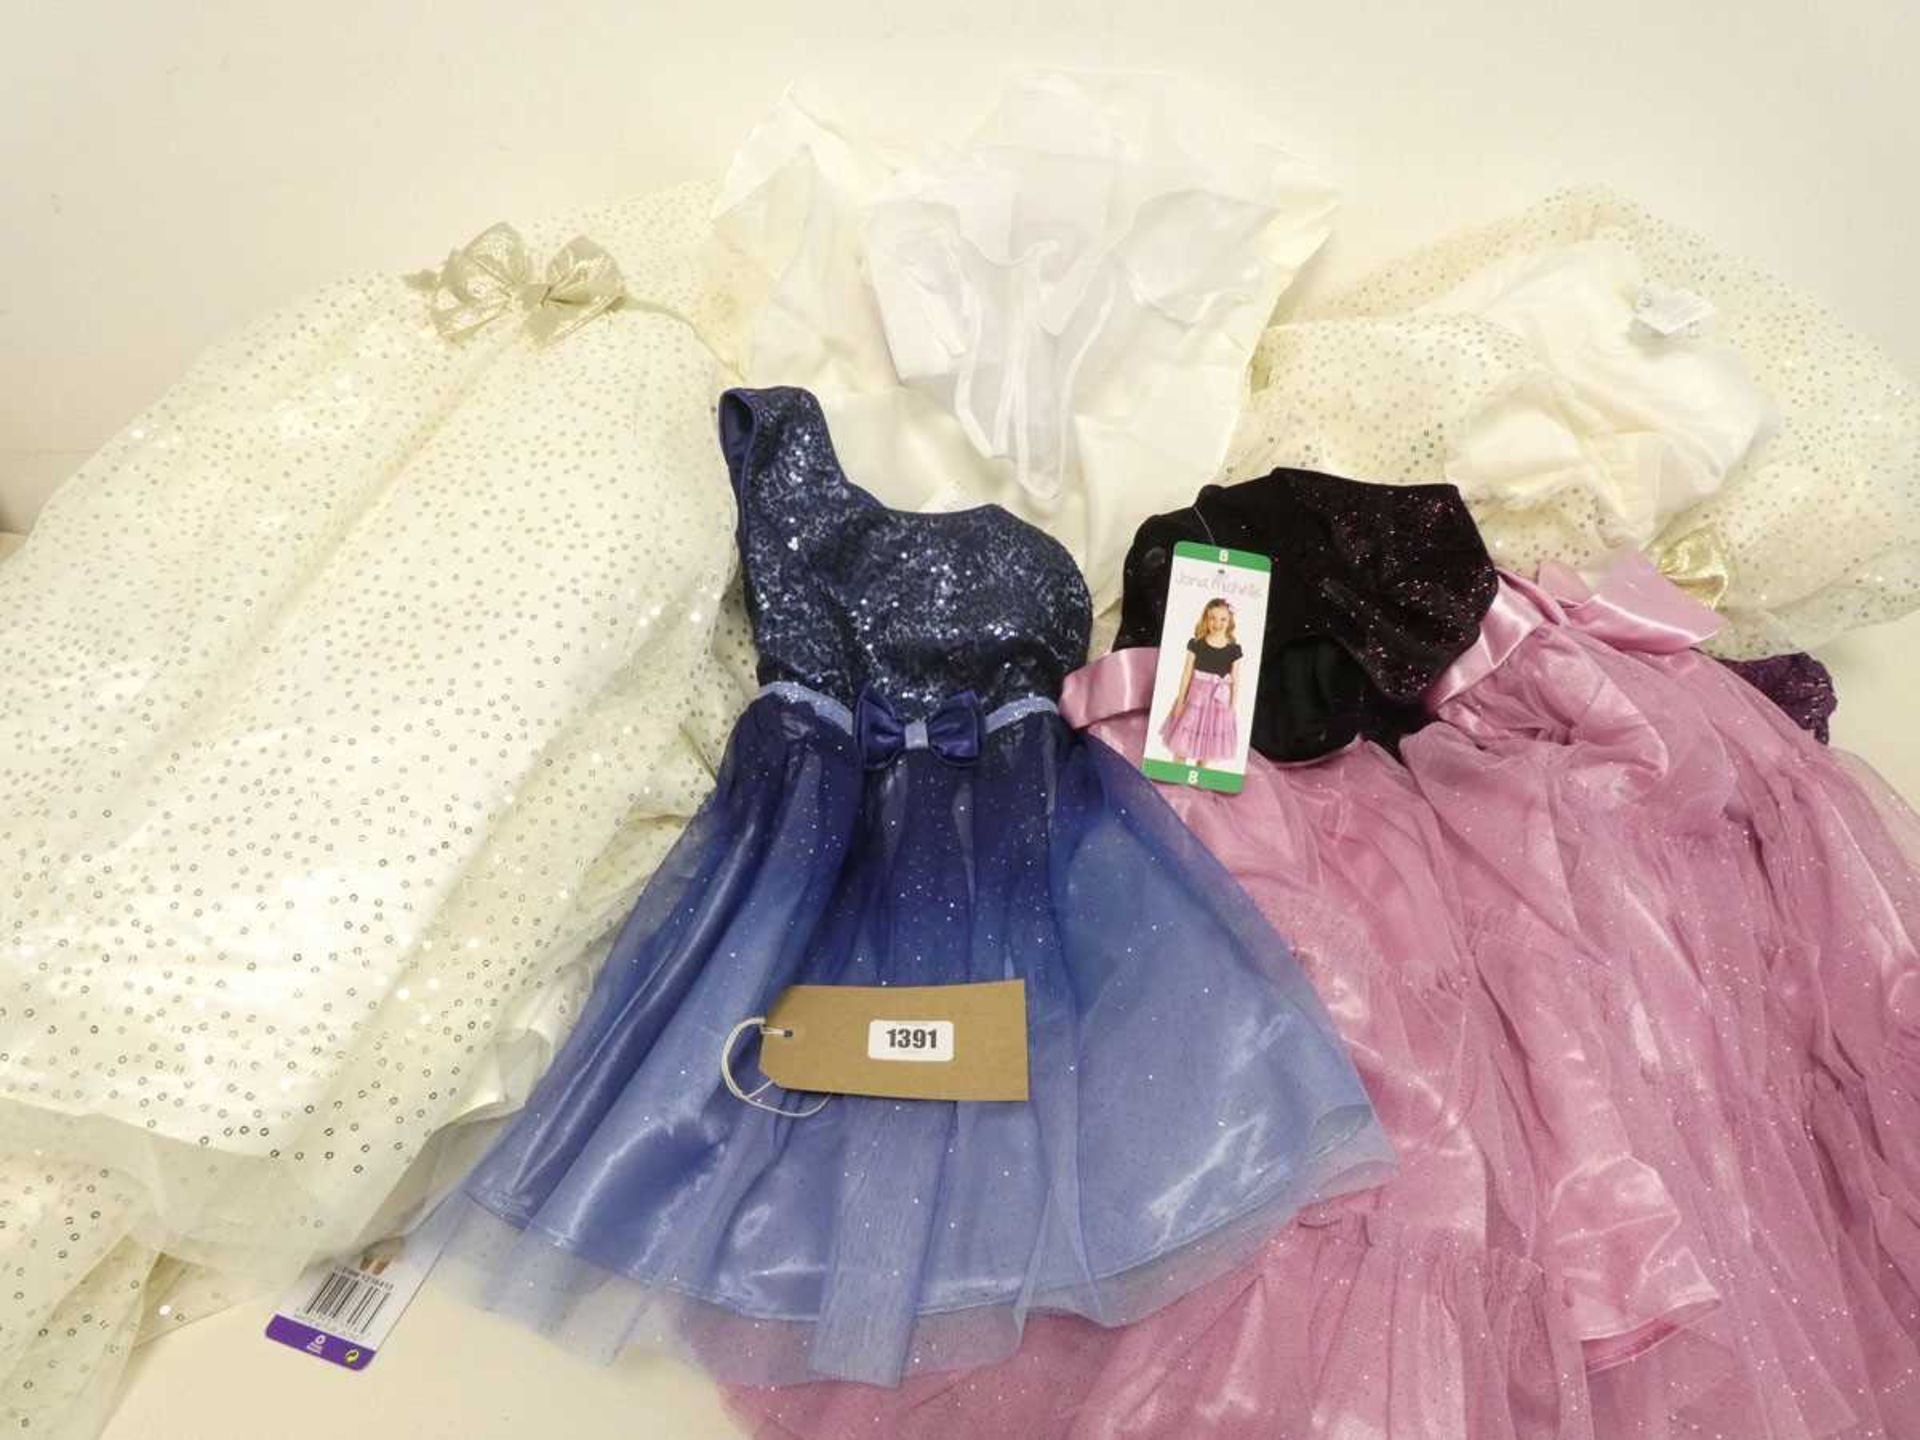 Approx. 15 girls party dresses by Jona Michelle